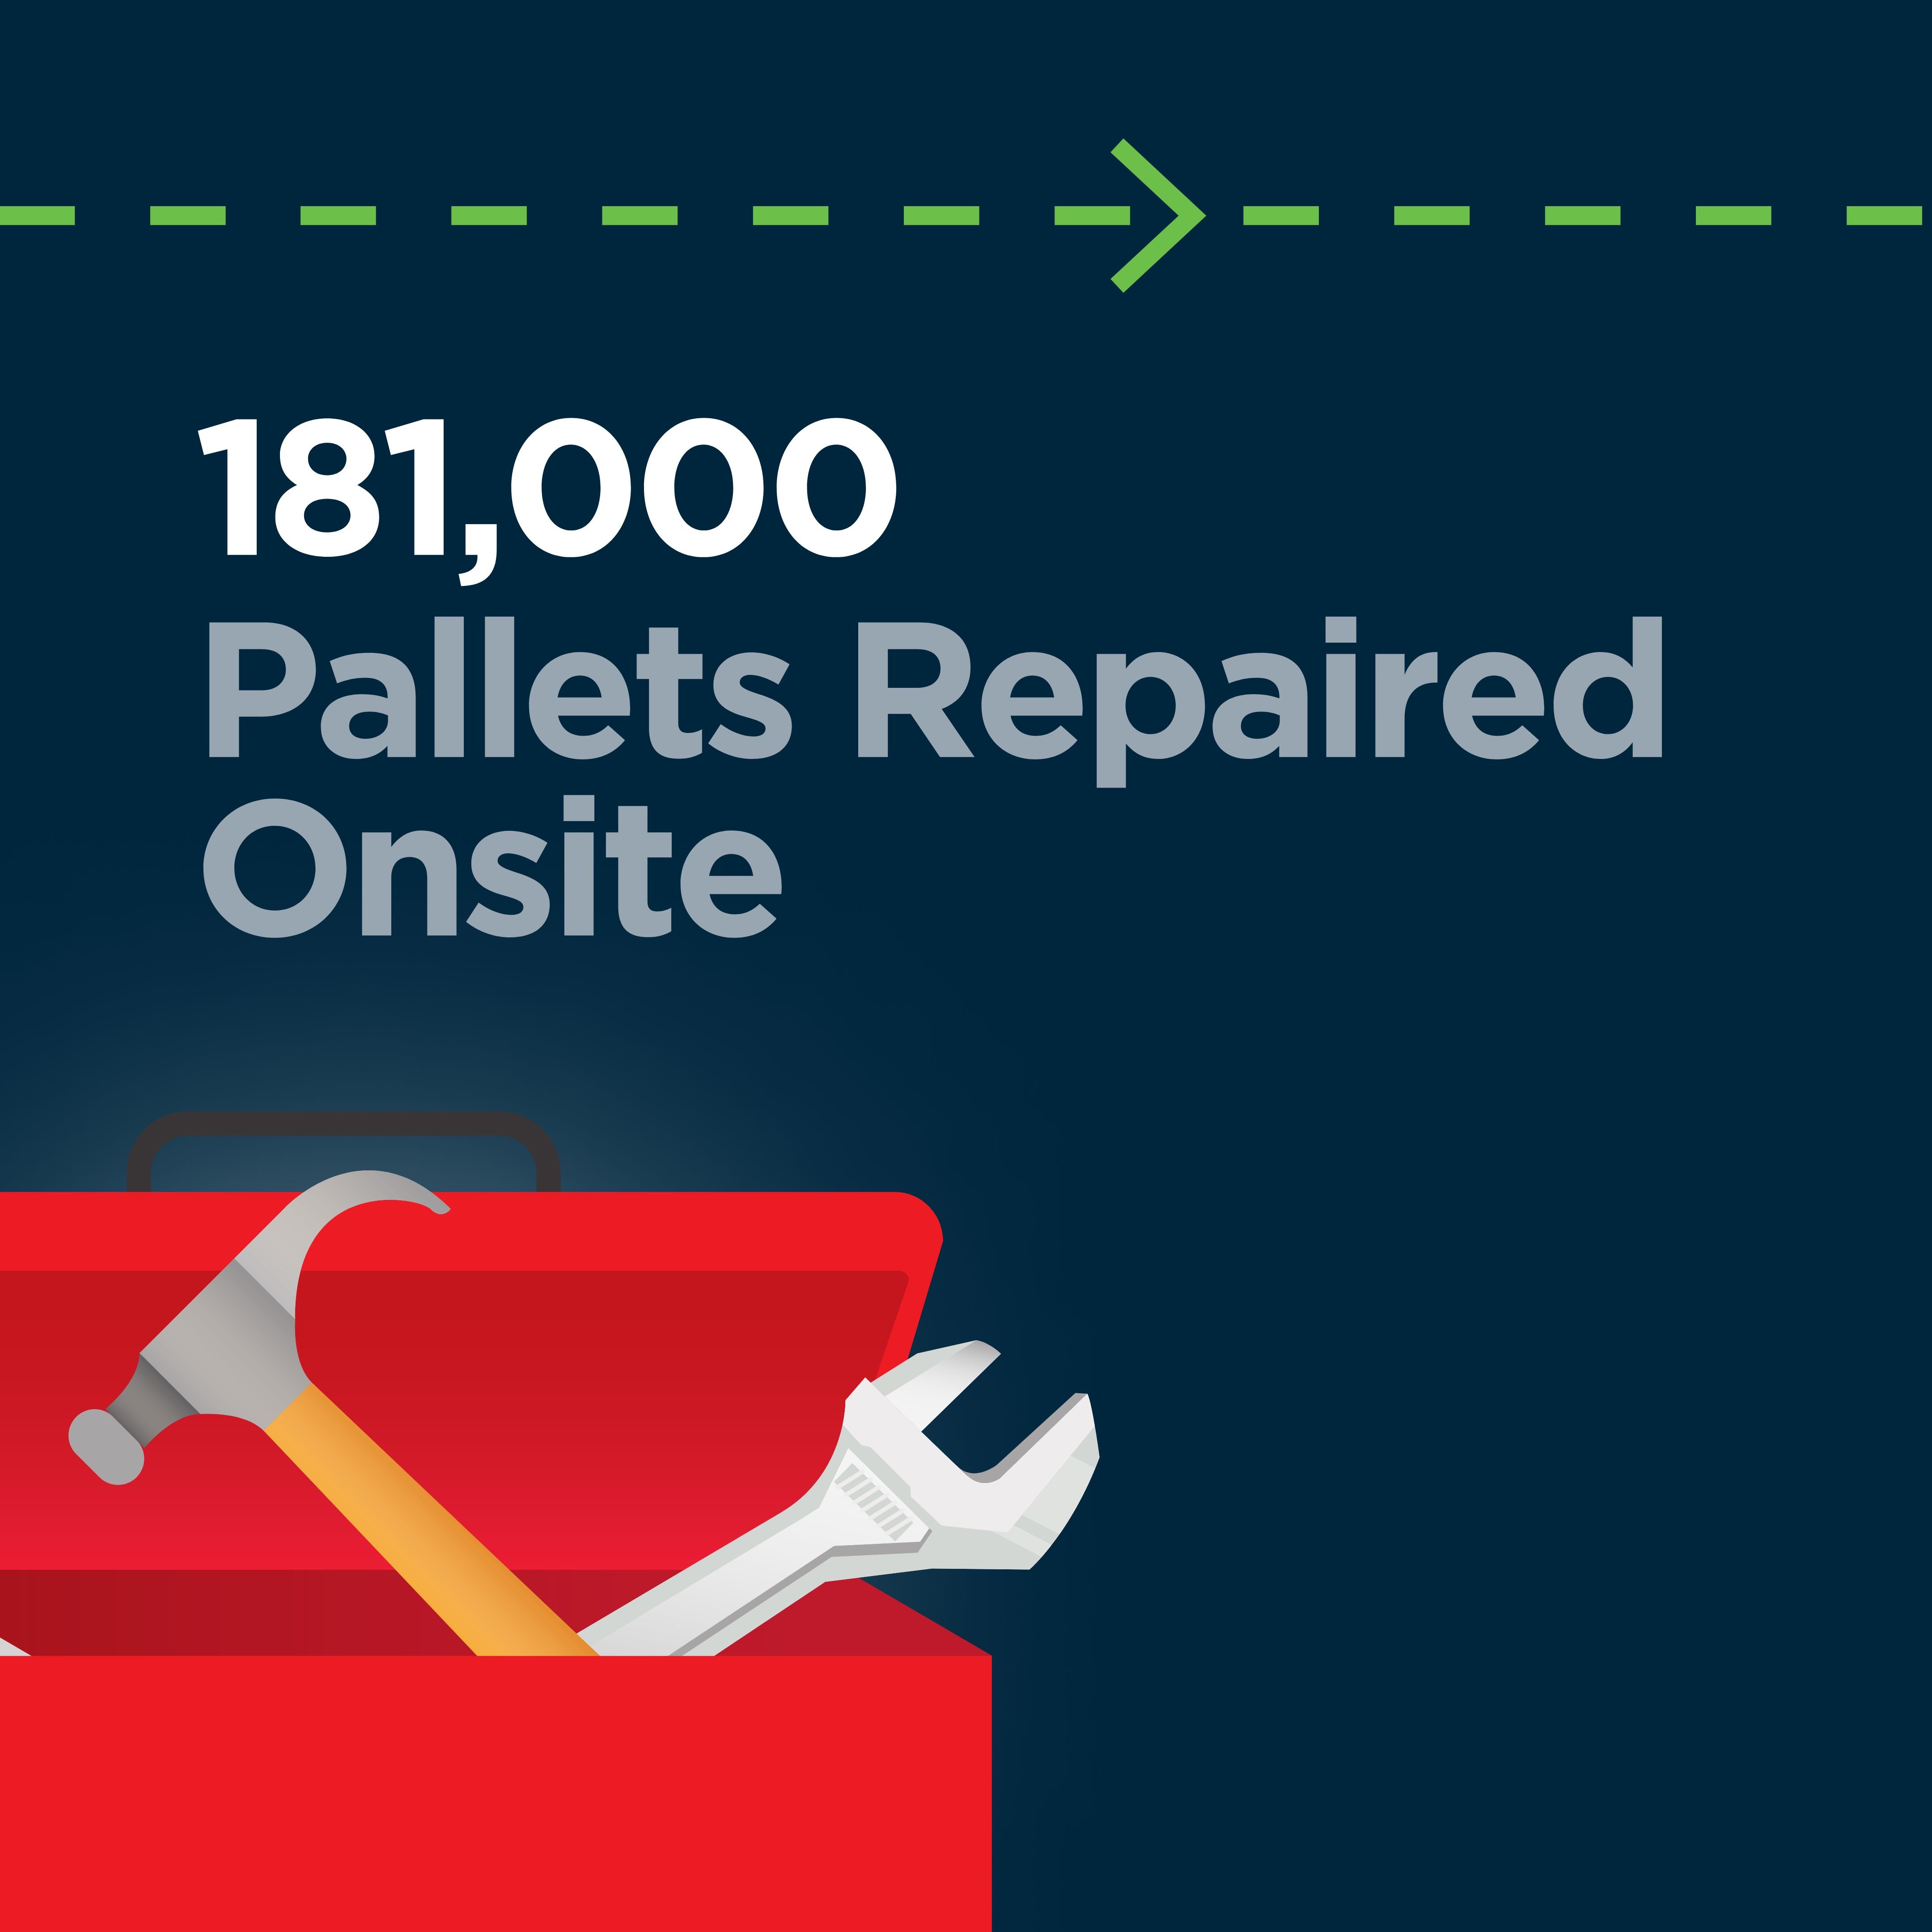 181,000 pallets repaired onsite